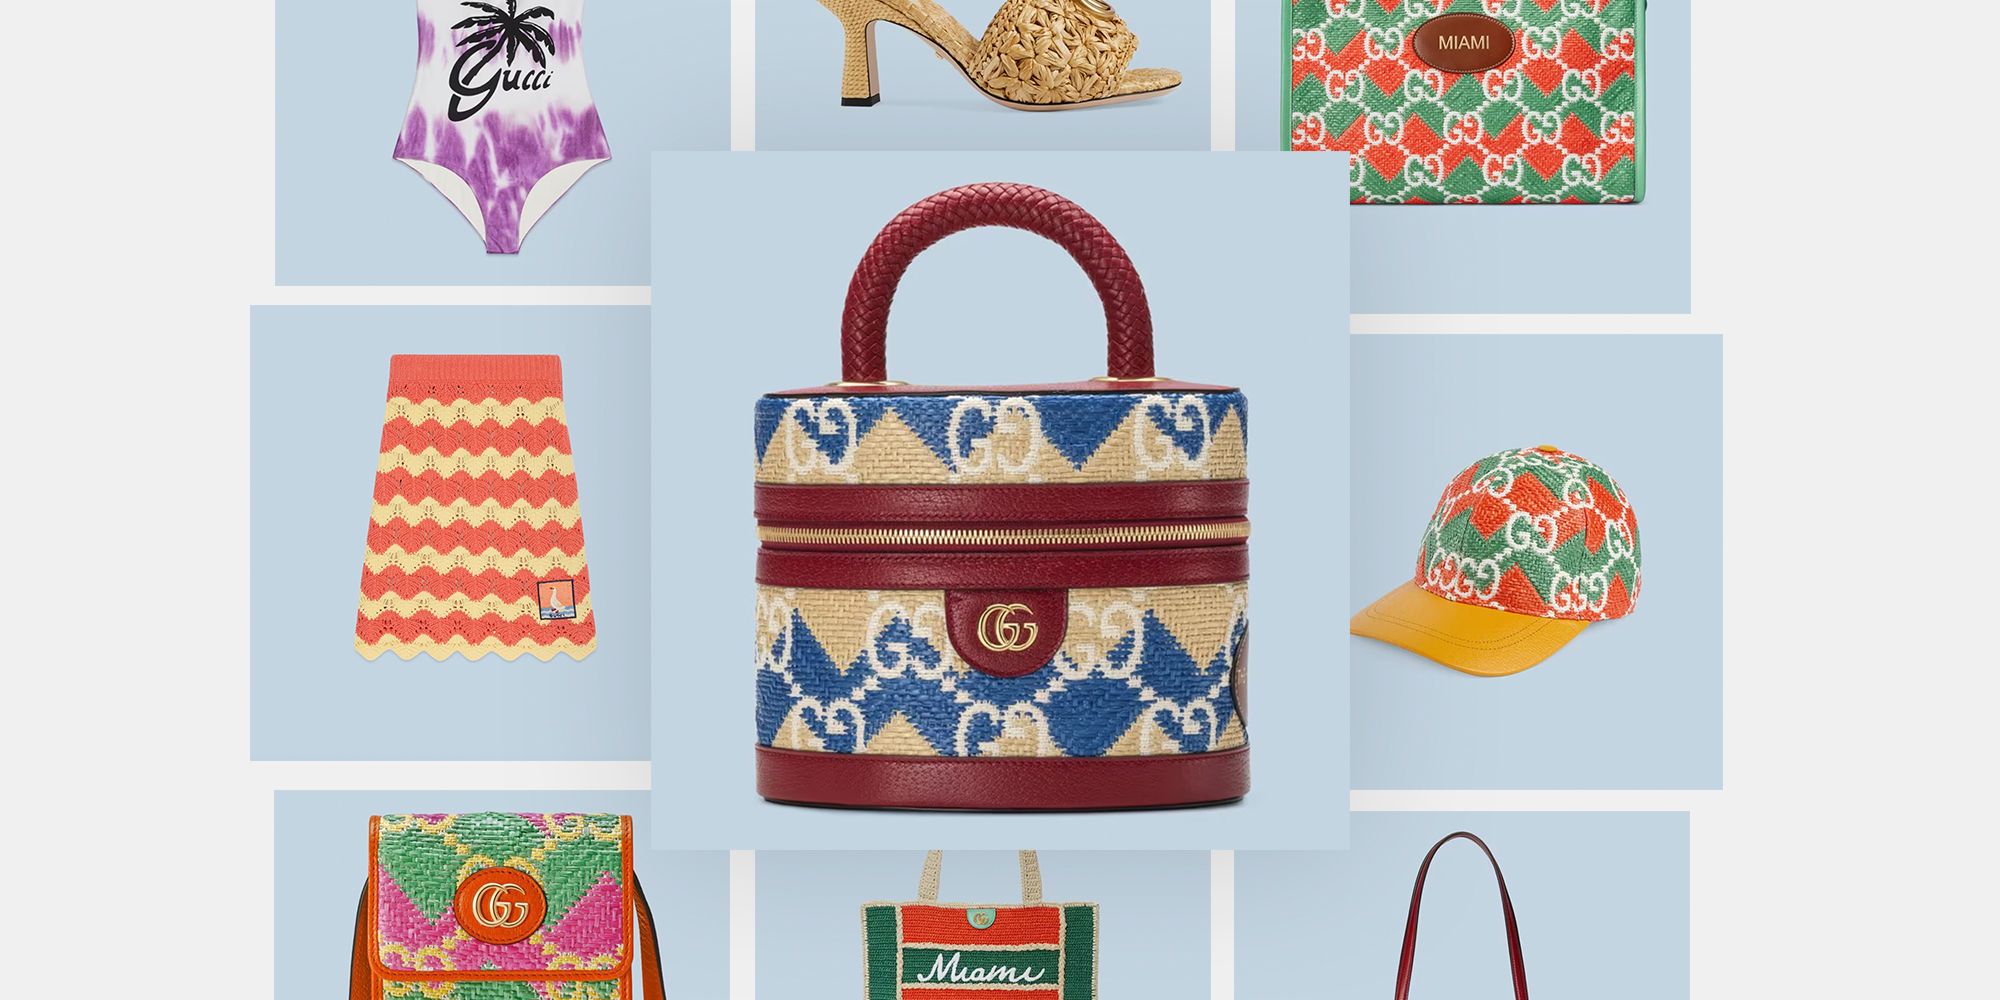 Desert vibes -#fashion  Gucci bags outlet, Bags, Gucci bag outfit